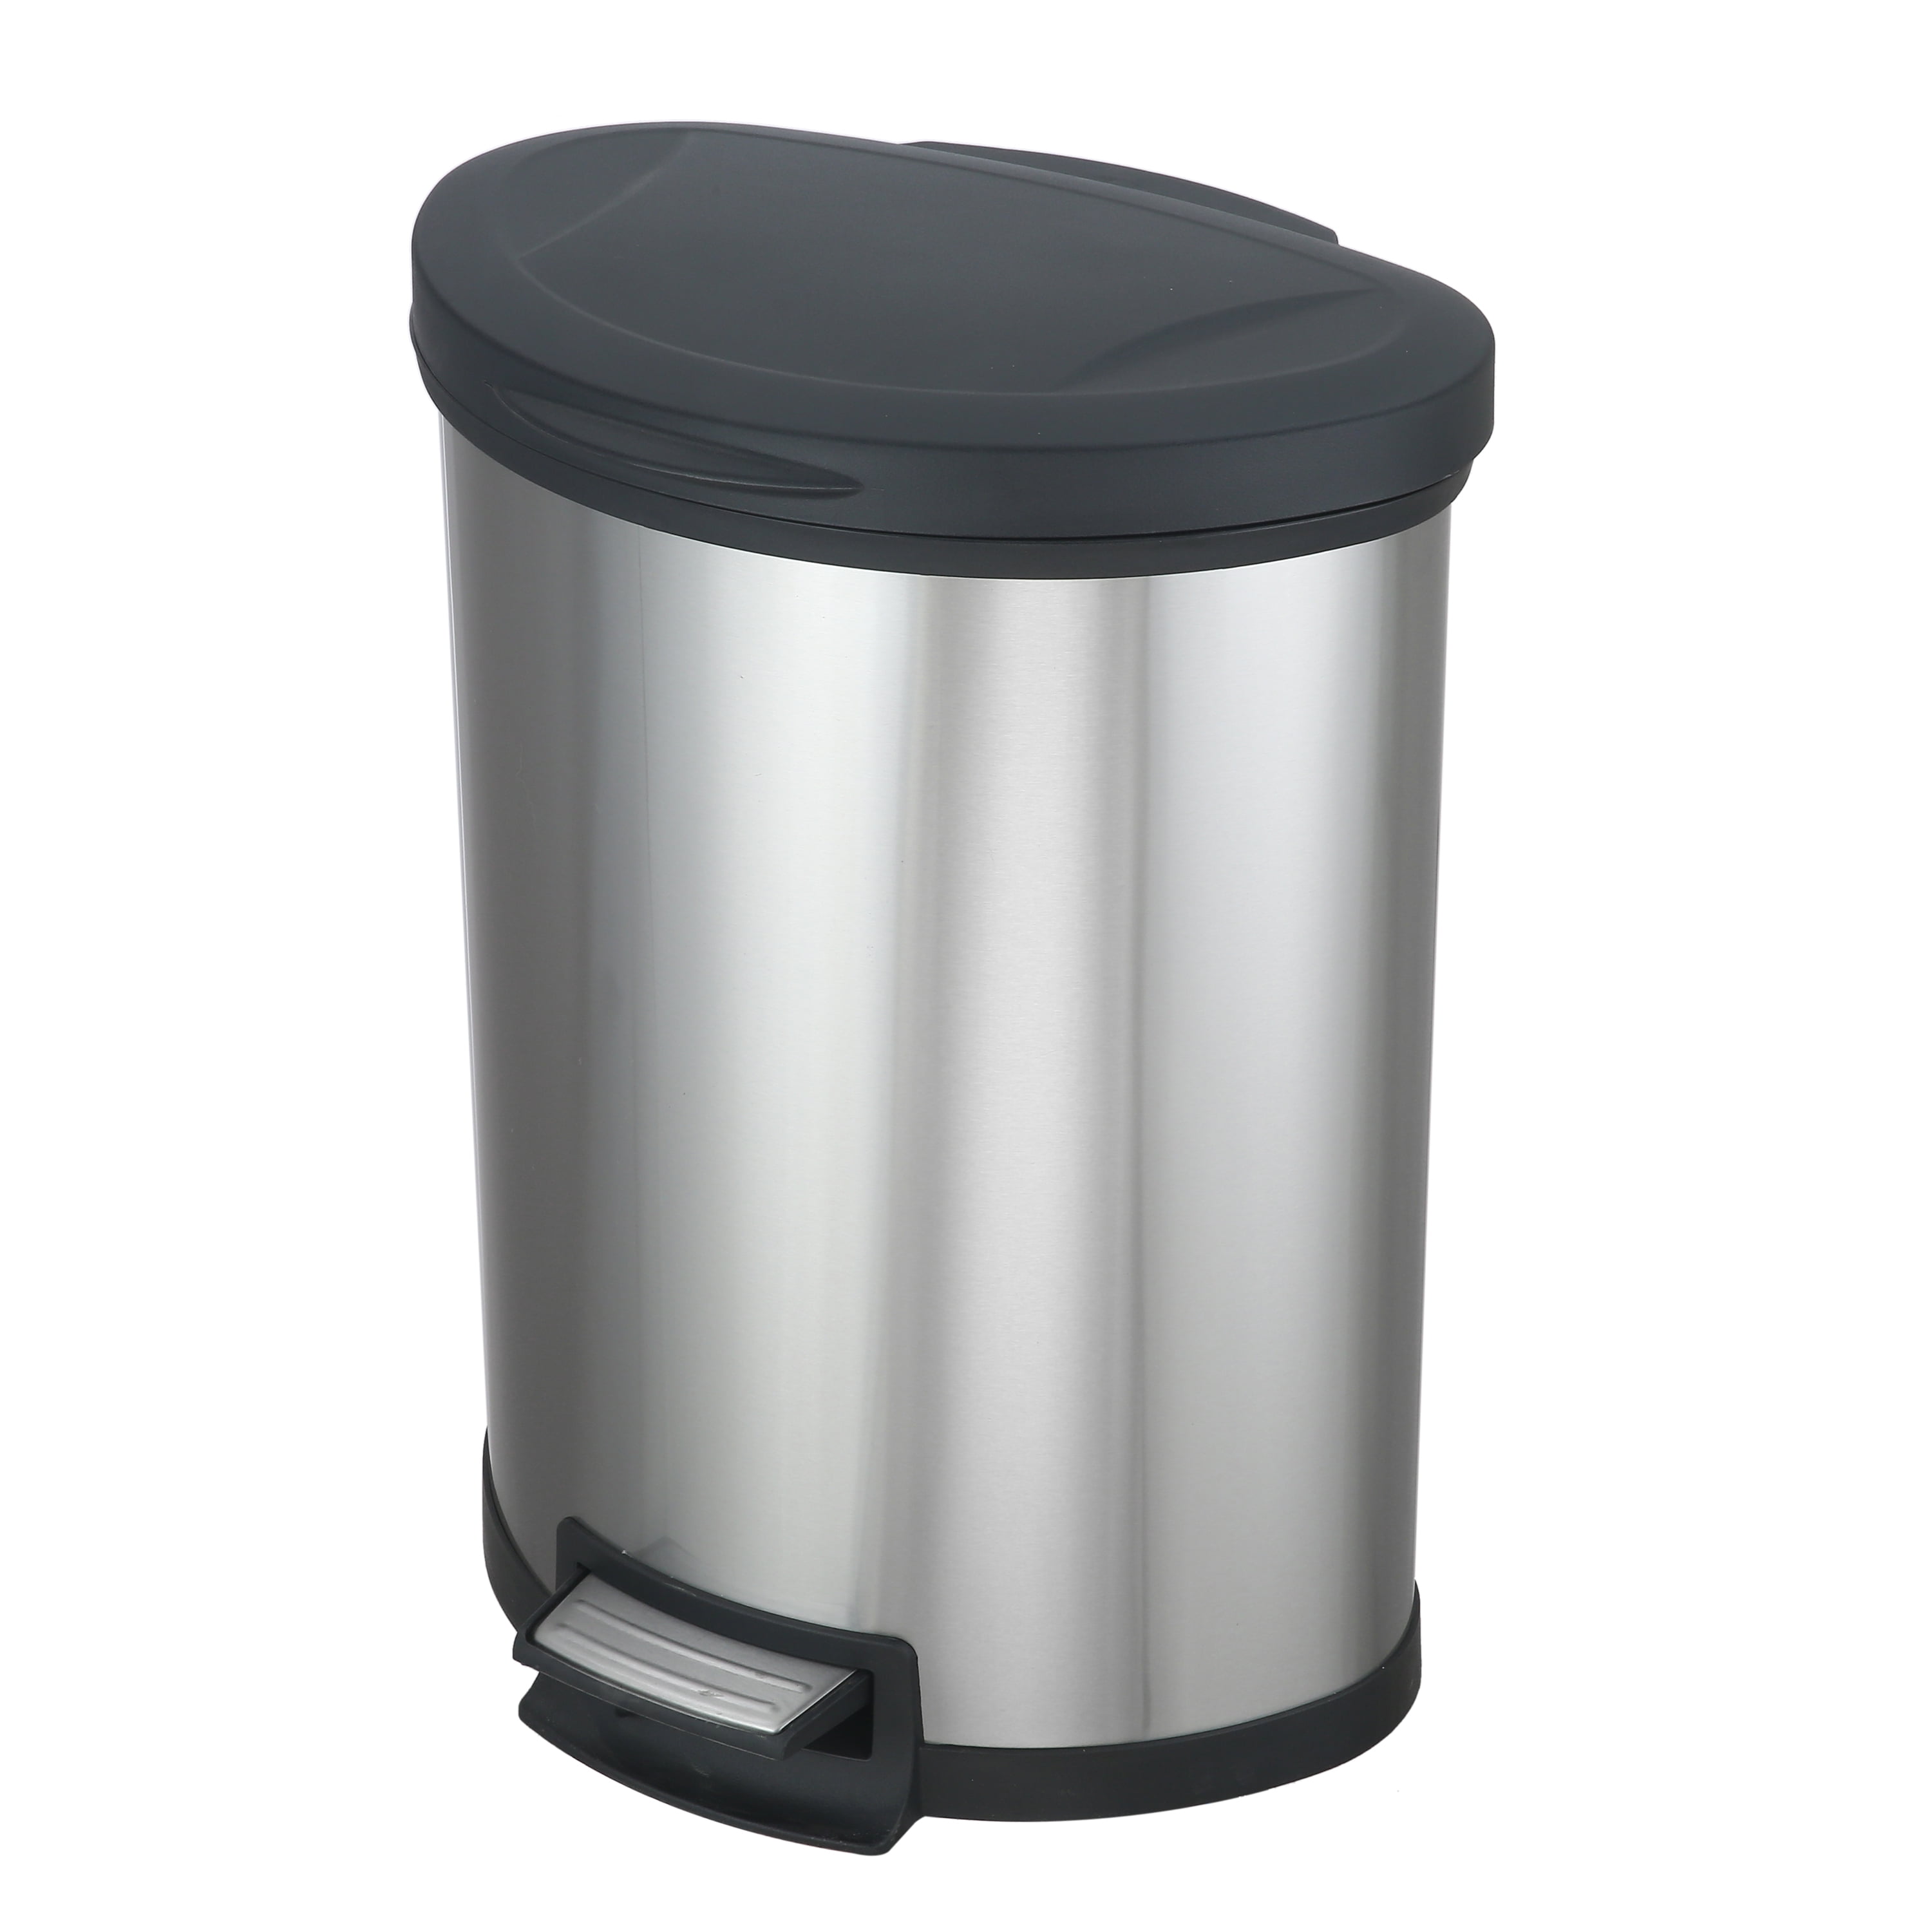 Mainstays 13 Gallon Trash Can, Plastic Swing Top Kitchen Trash Can, Gray